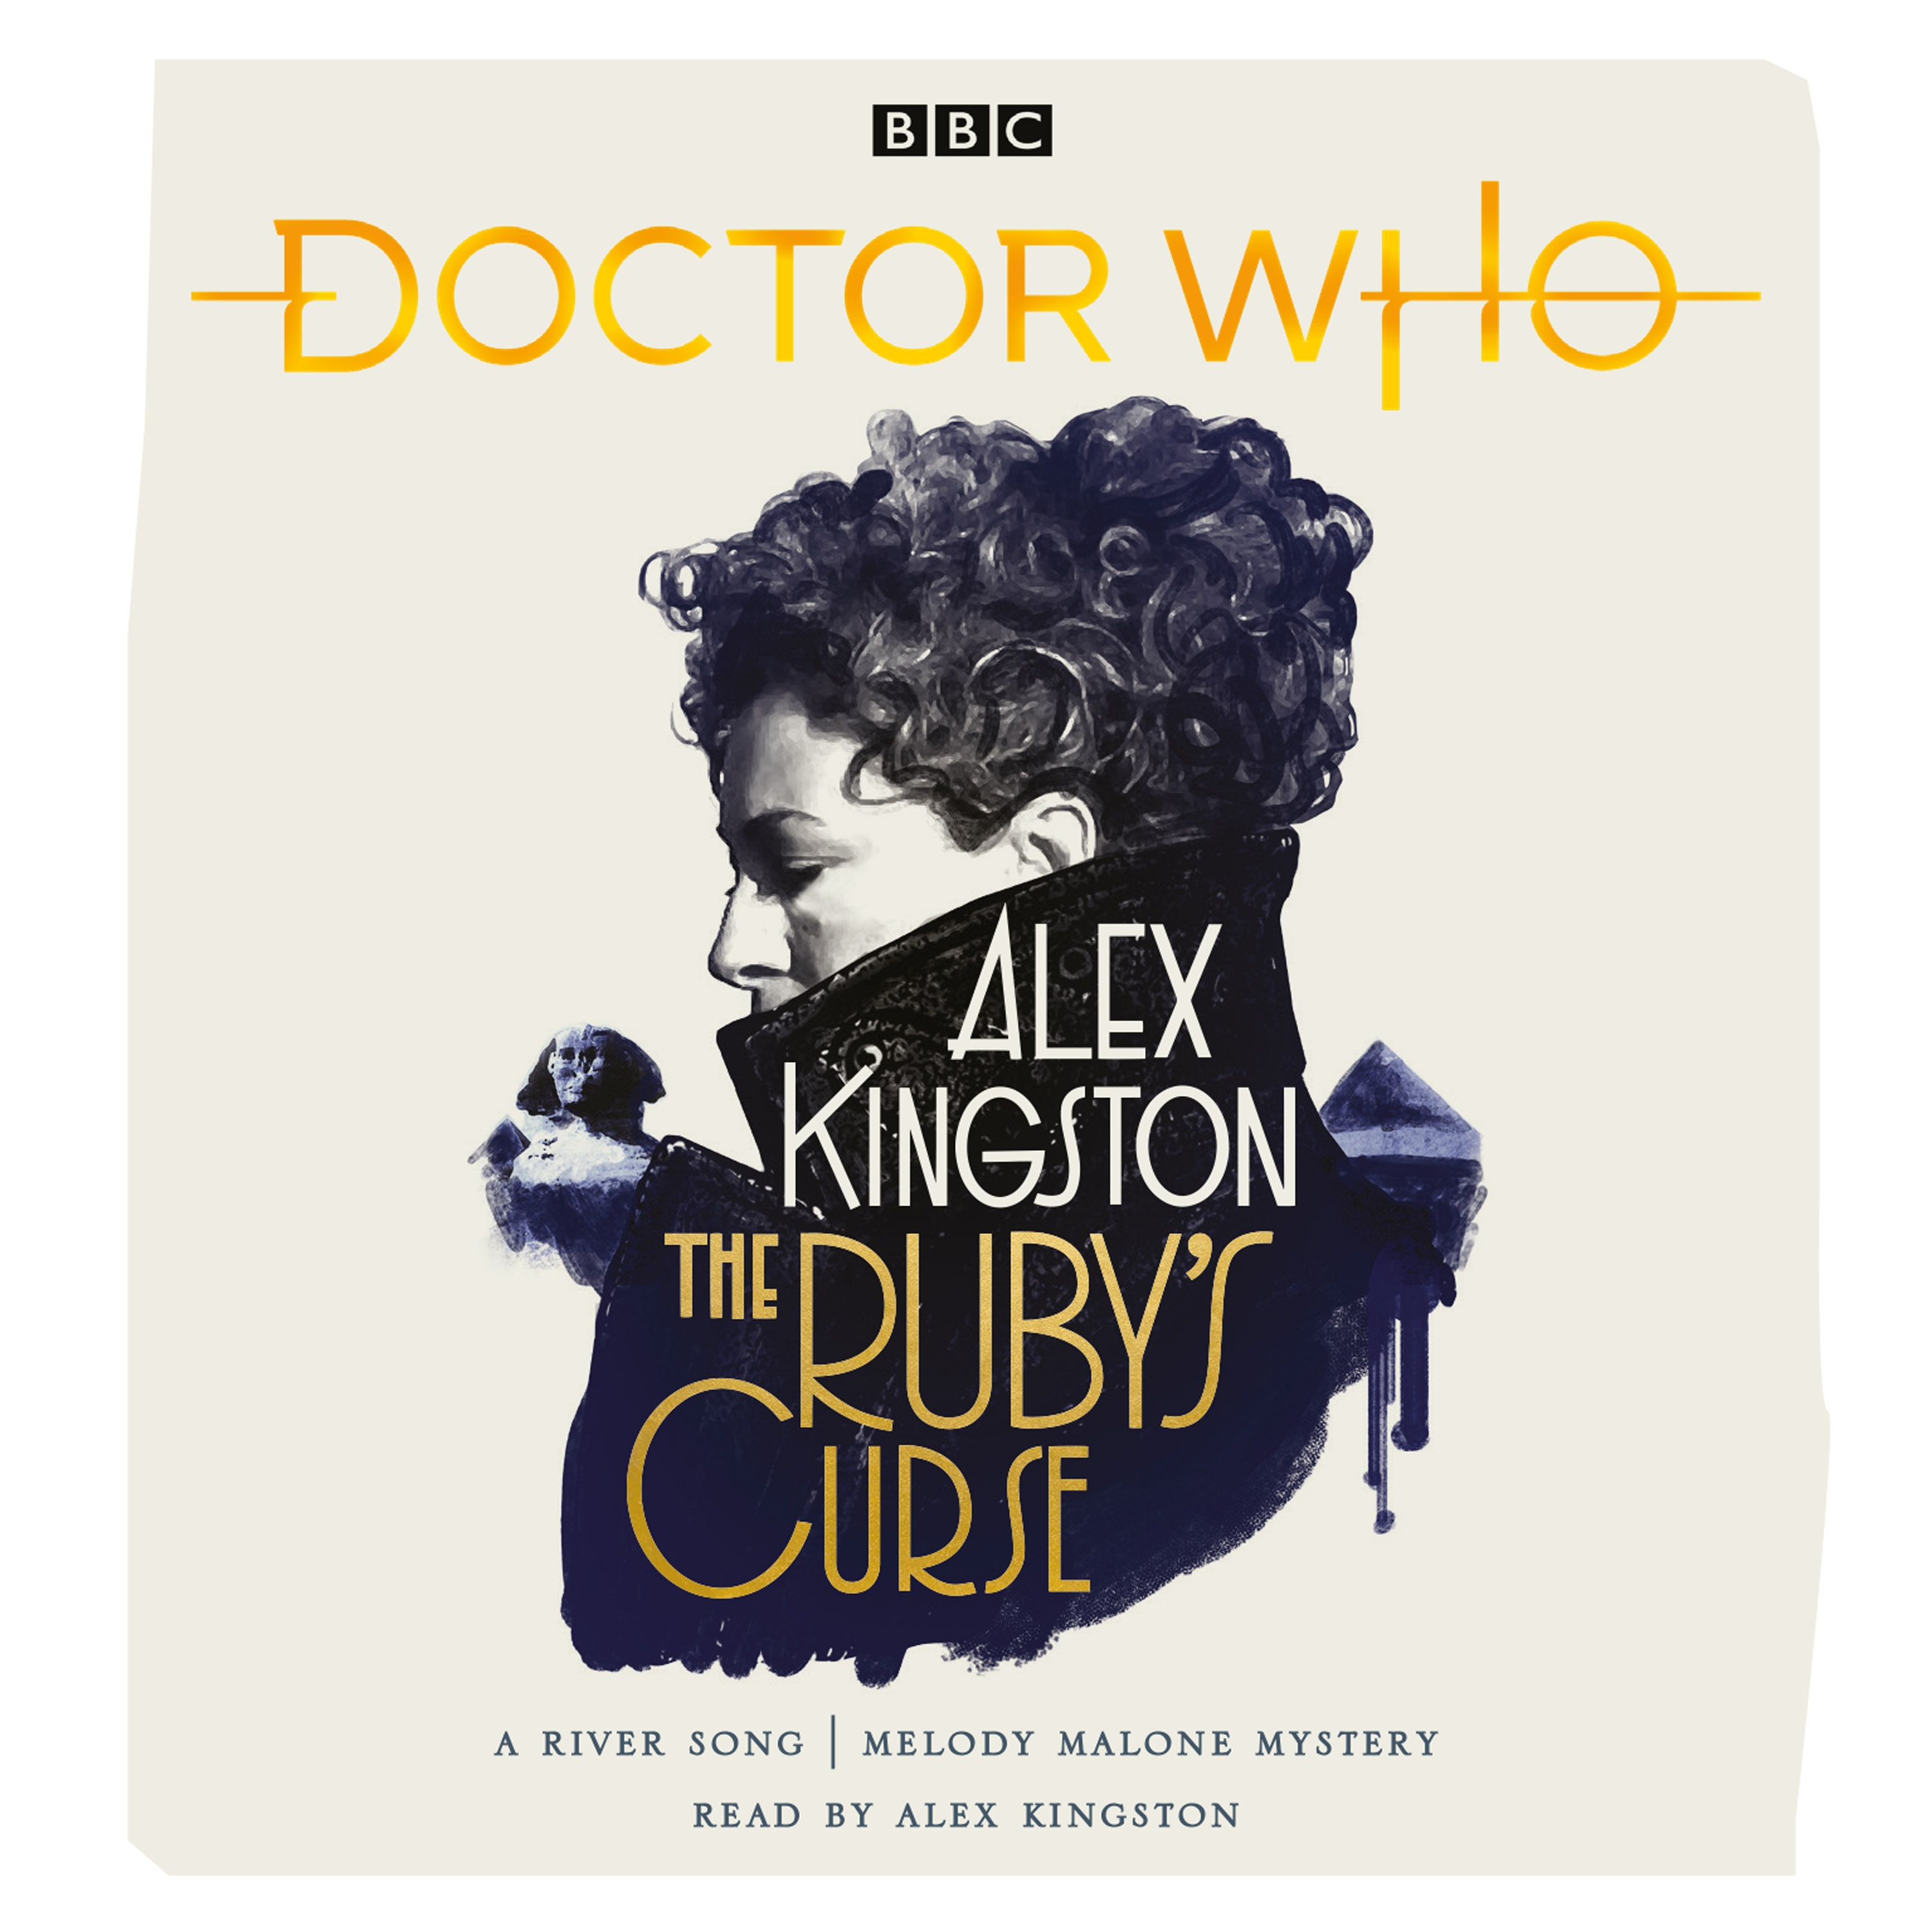 Audiobook cover for The Ruby's Curse: Cream background with Doctor Who logo at the top, and an illustration of River Song in the centre, with title and author name arranged within it.